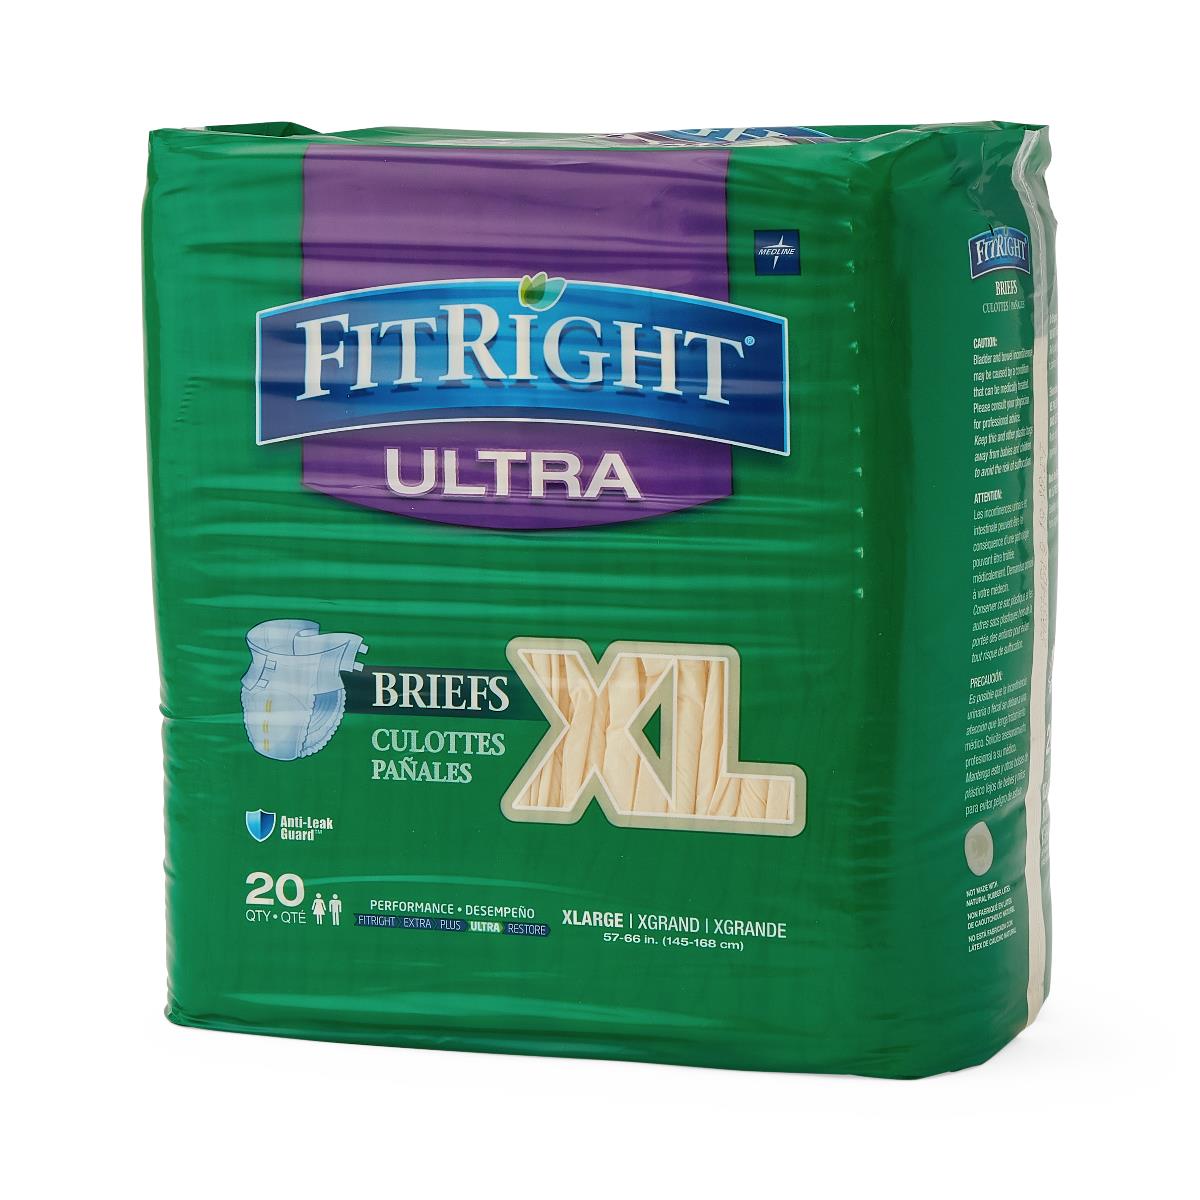 Medline FitRight Ultra Brief Size XL FITULTRAXLG